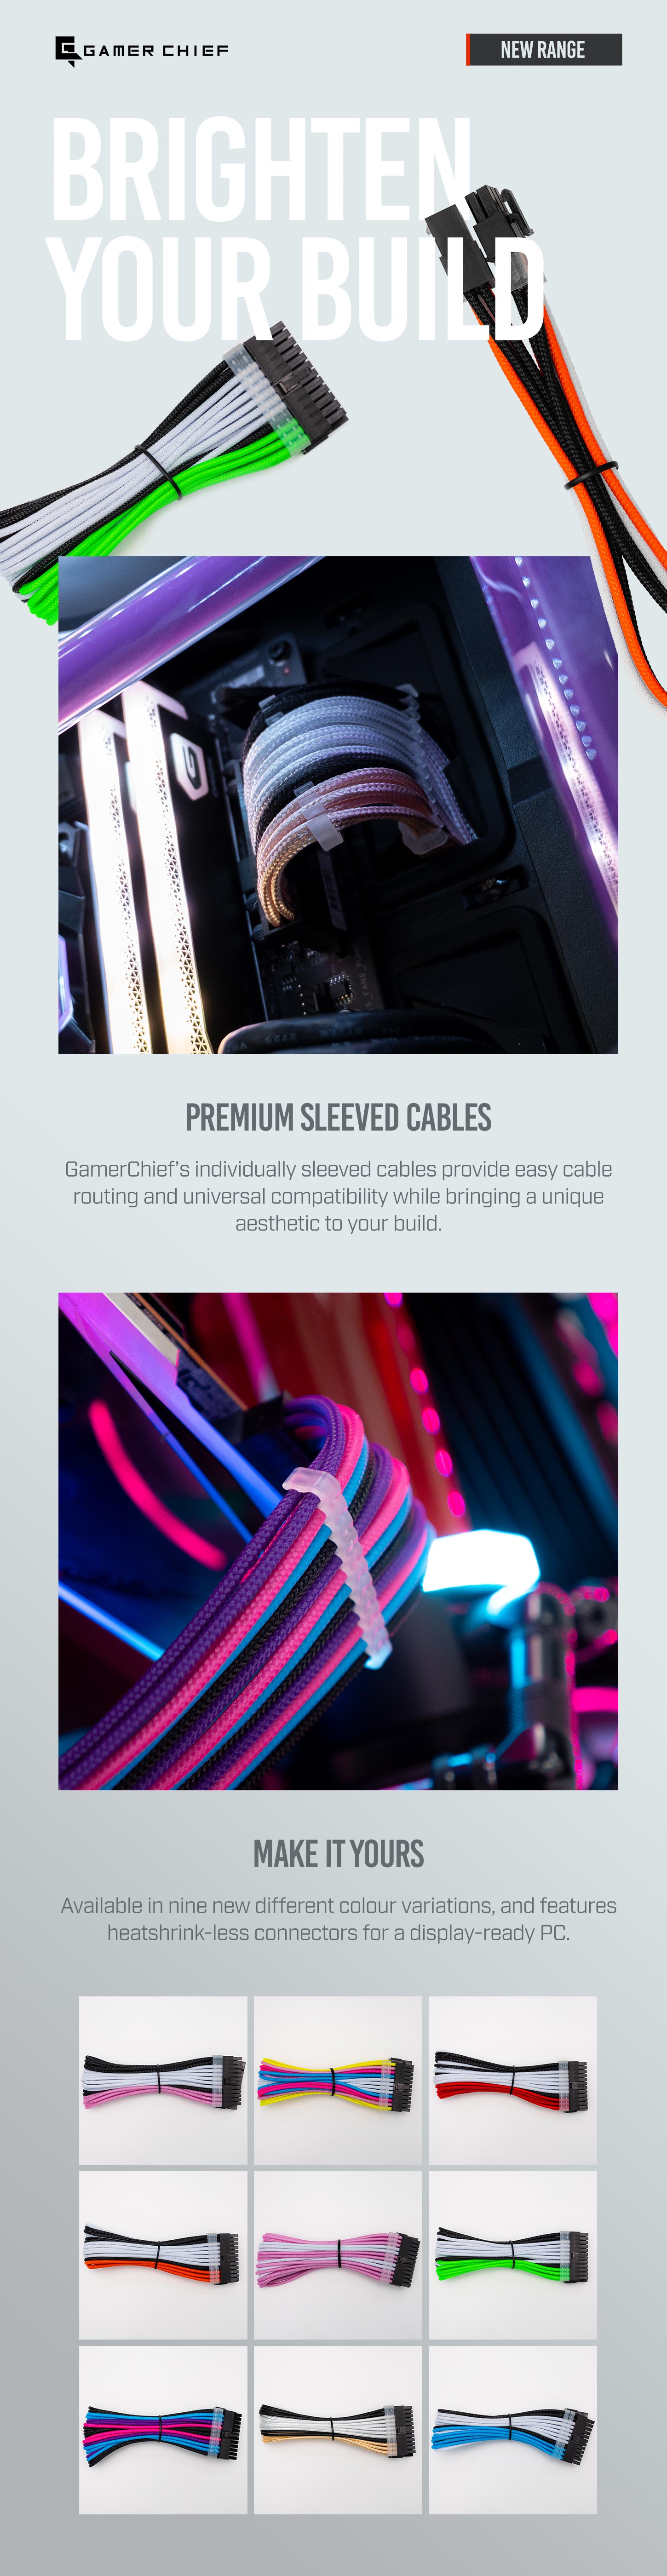 A large marketing image providing additional information about the product GamerChief Elite Series 24-Pin ATX 30cm Sleeved Extension Cable (Pink/White/Black) - Additional alt info not provided